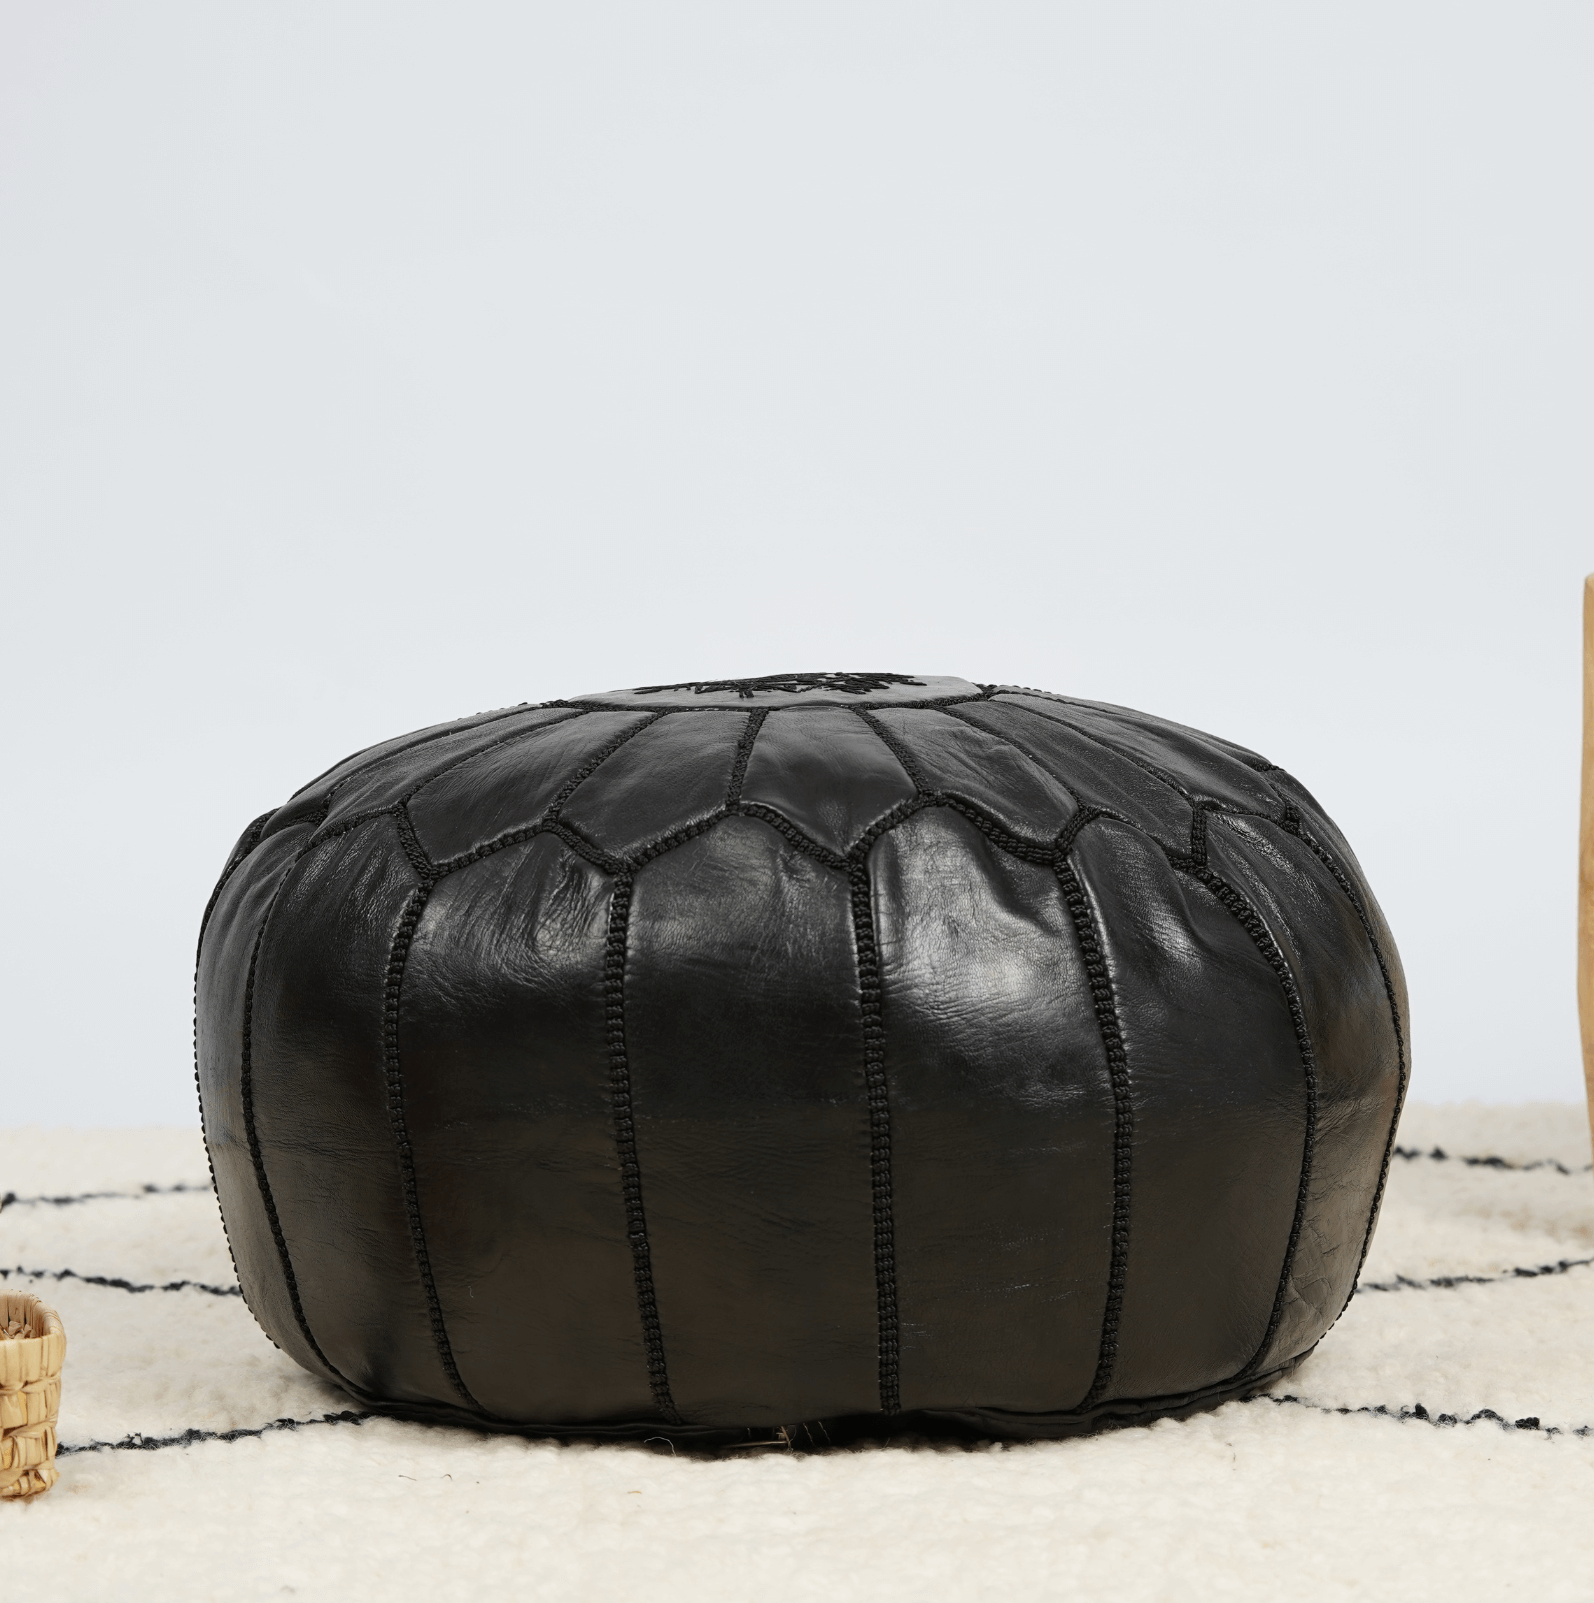 FULLY BLACK MOROCCAN LEATHER POUF